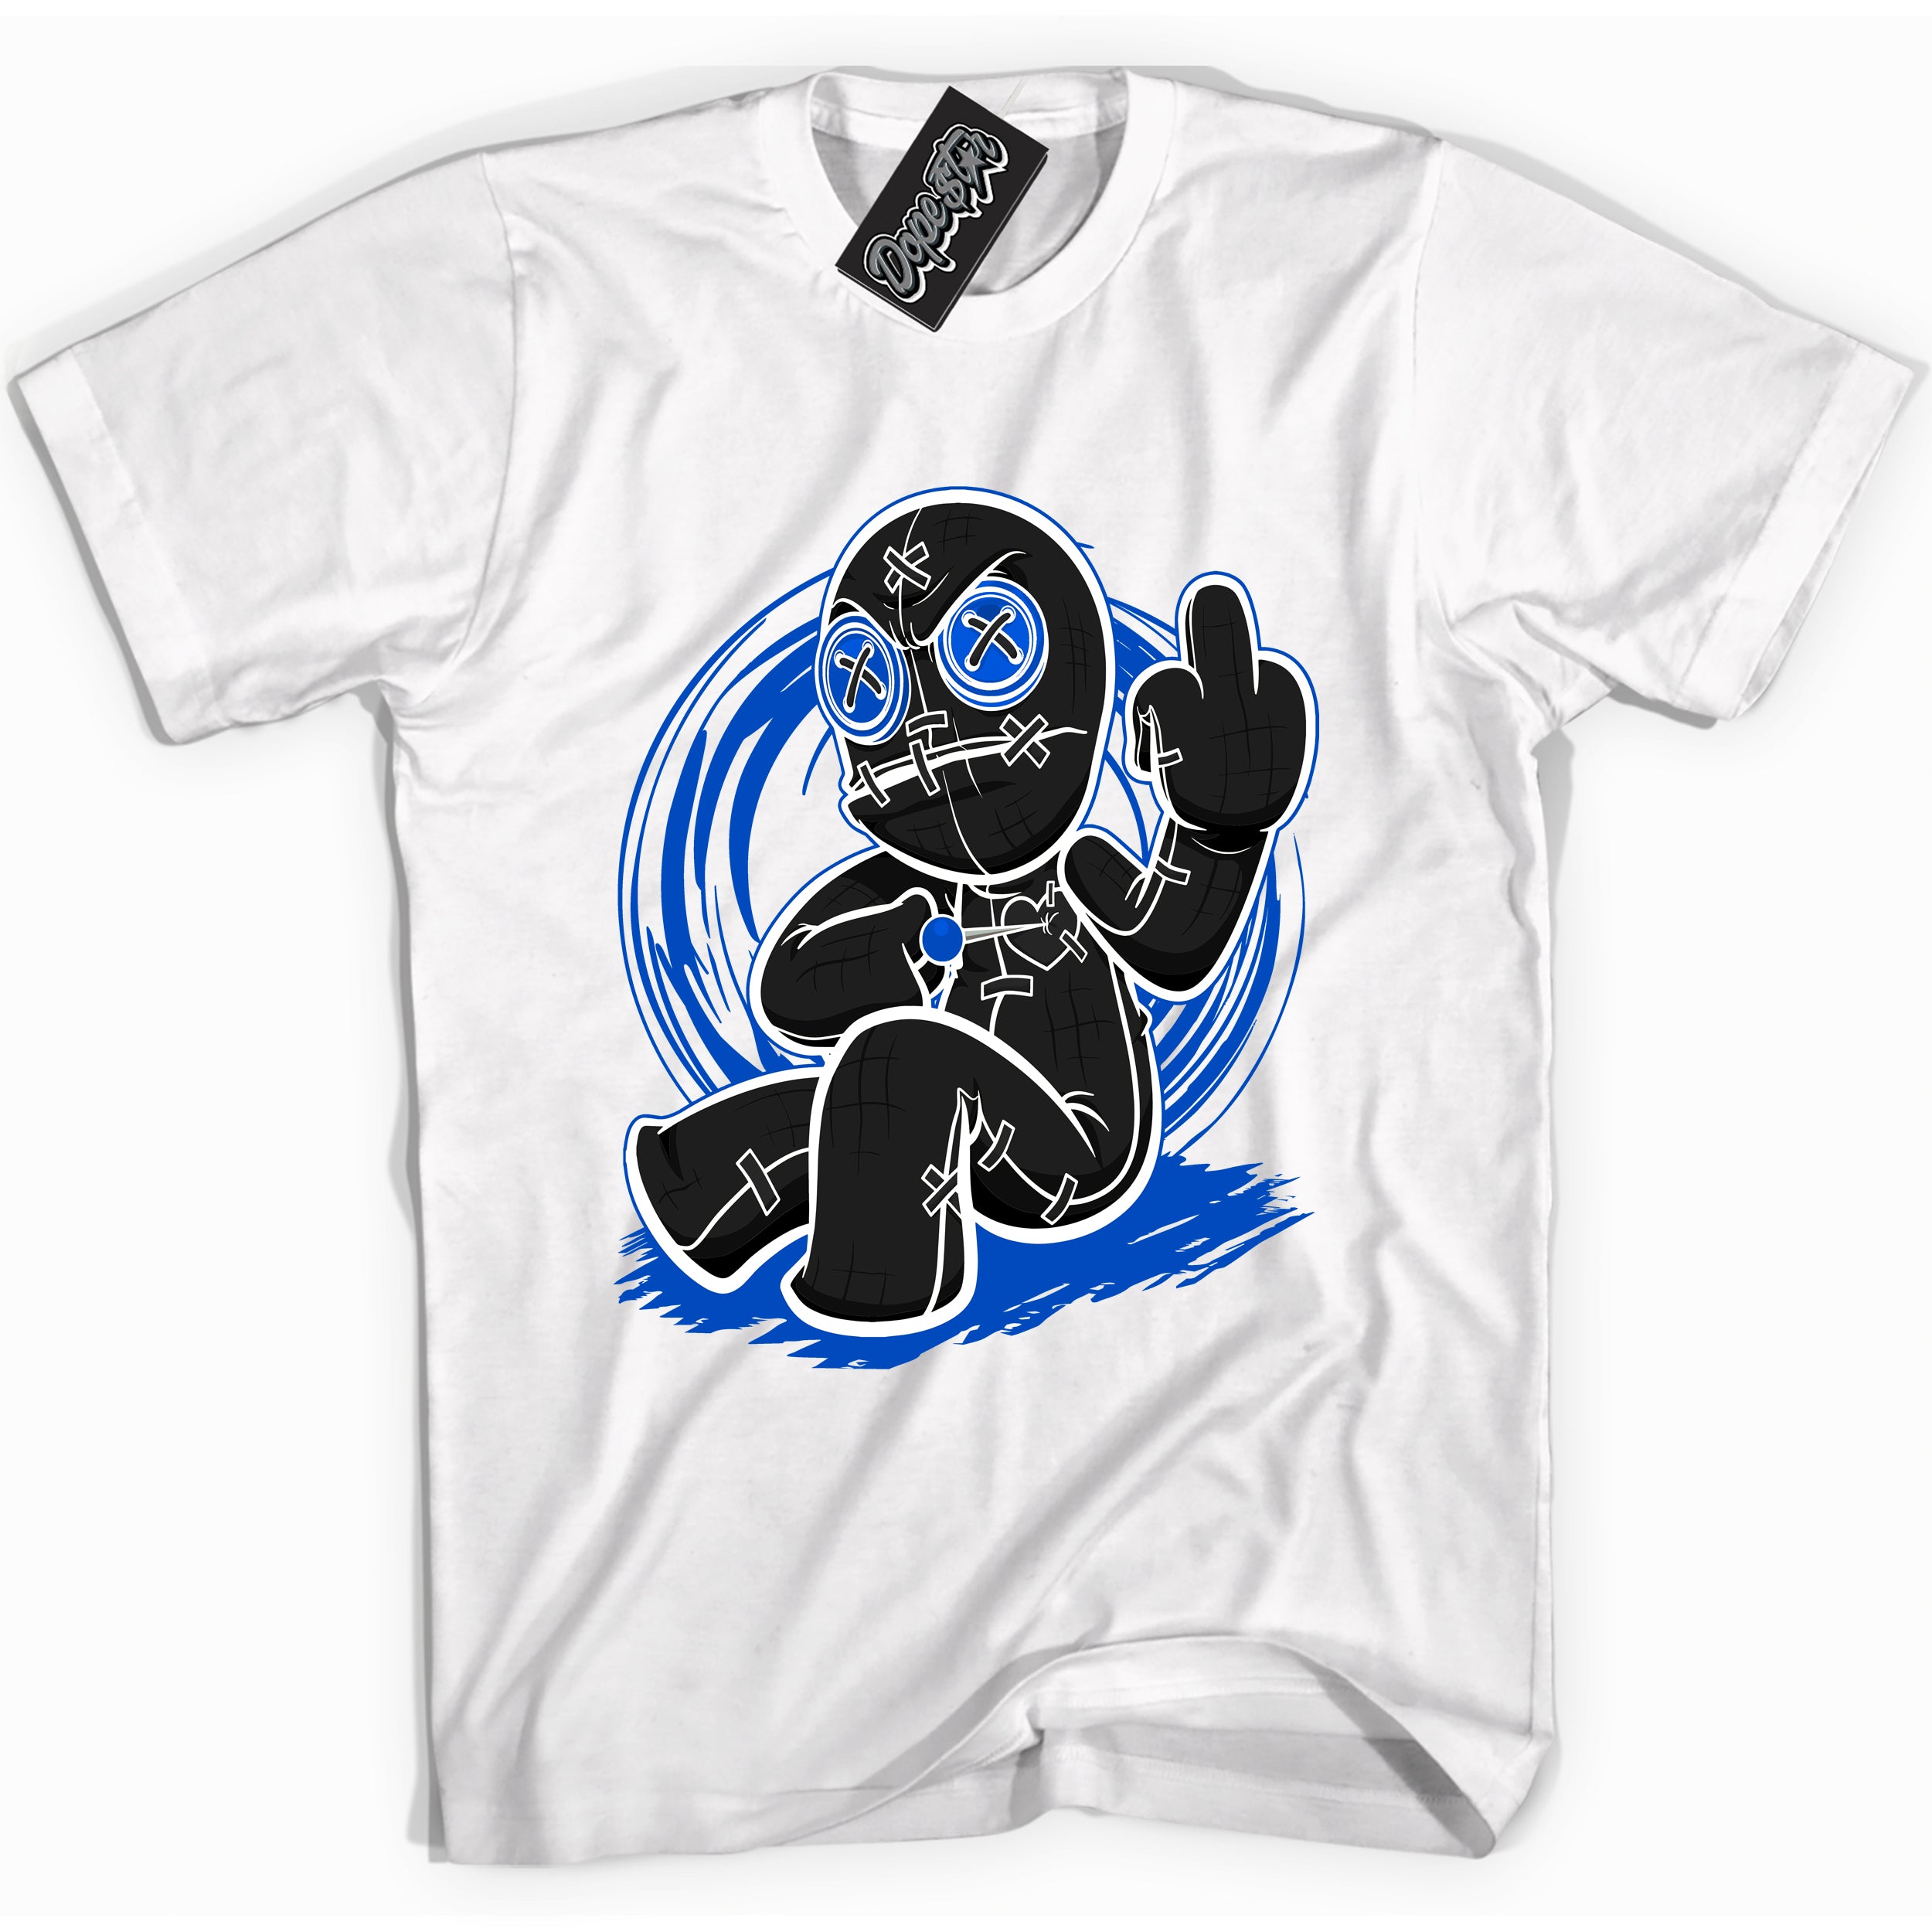 Cool White graphic tee with "Voodoo Doll" design, that perfectly matches Royal Reimagined 1s sneakers 